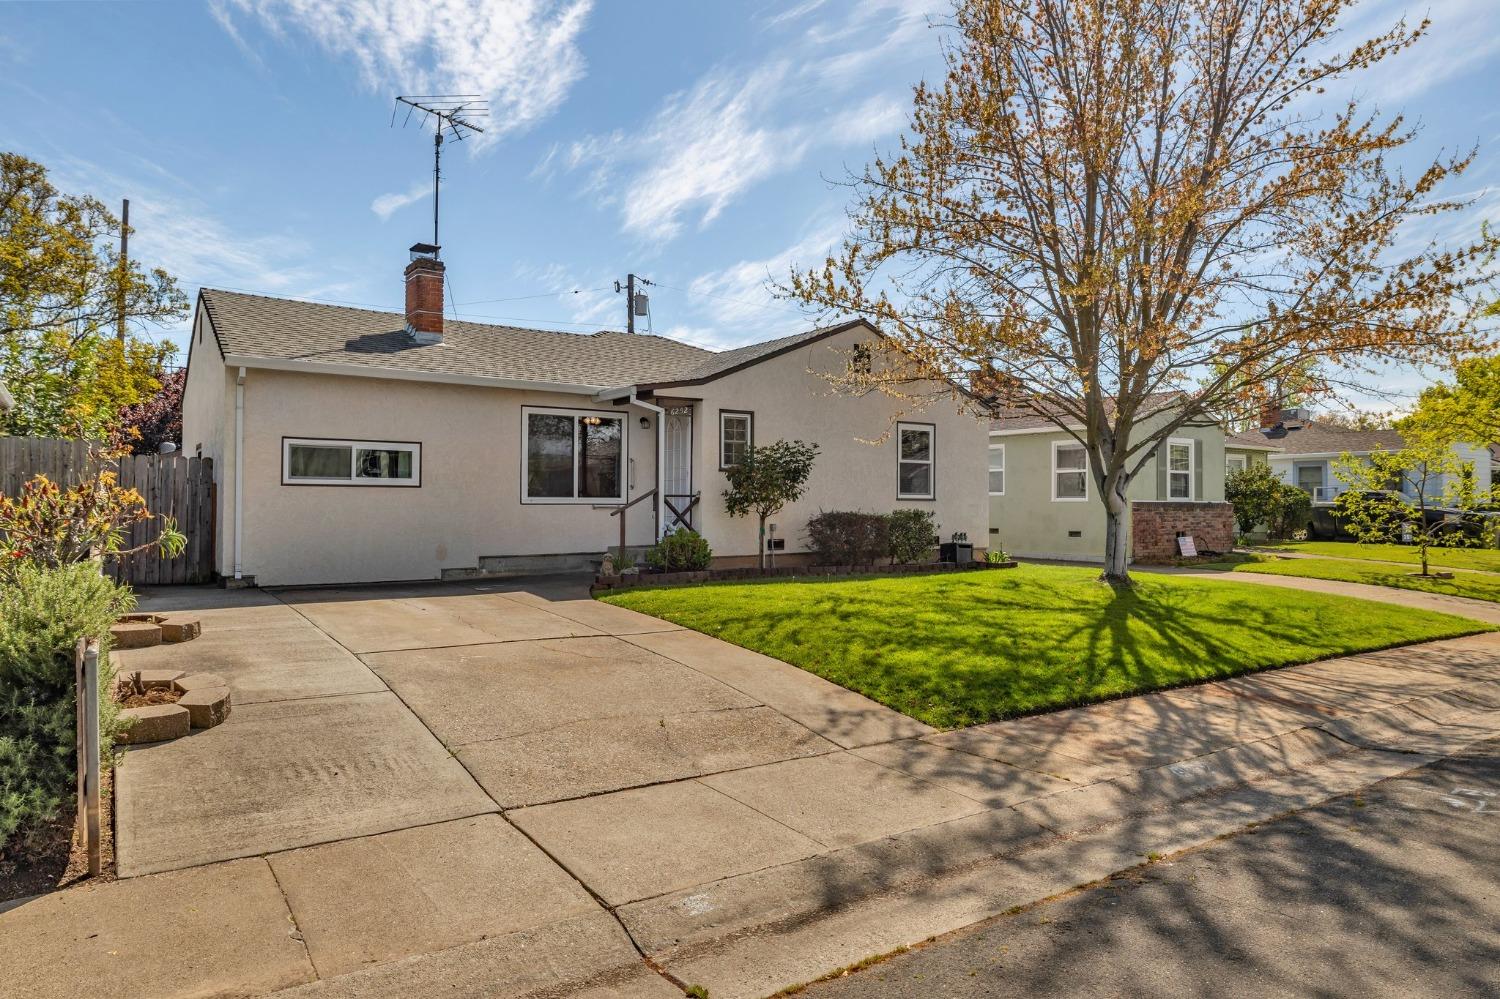 Photo of 6252 3rd Ave in Sacramento, CA